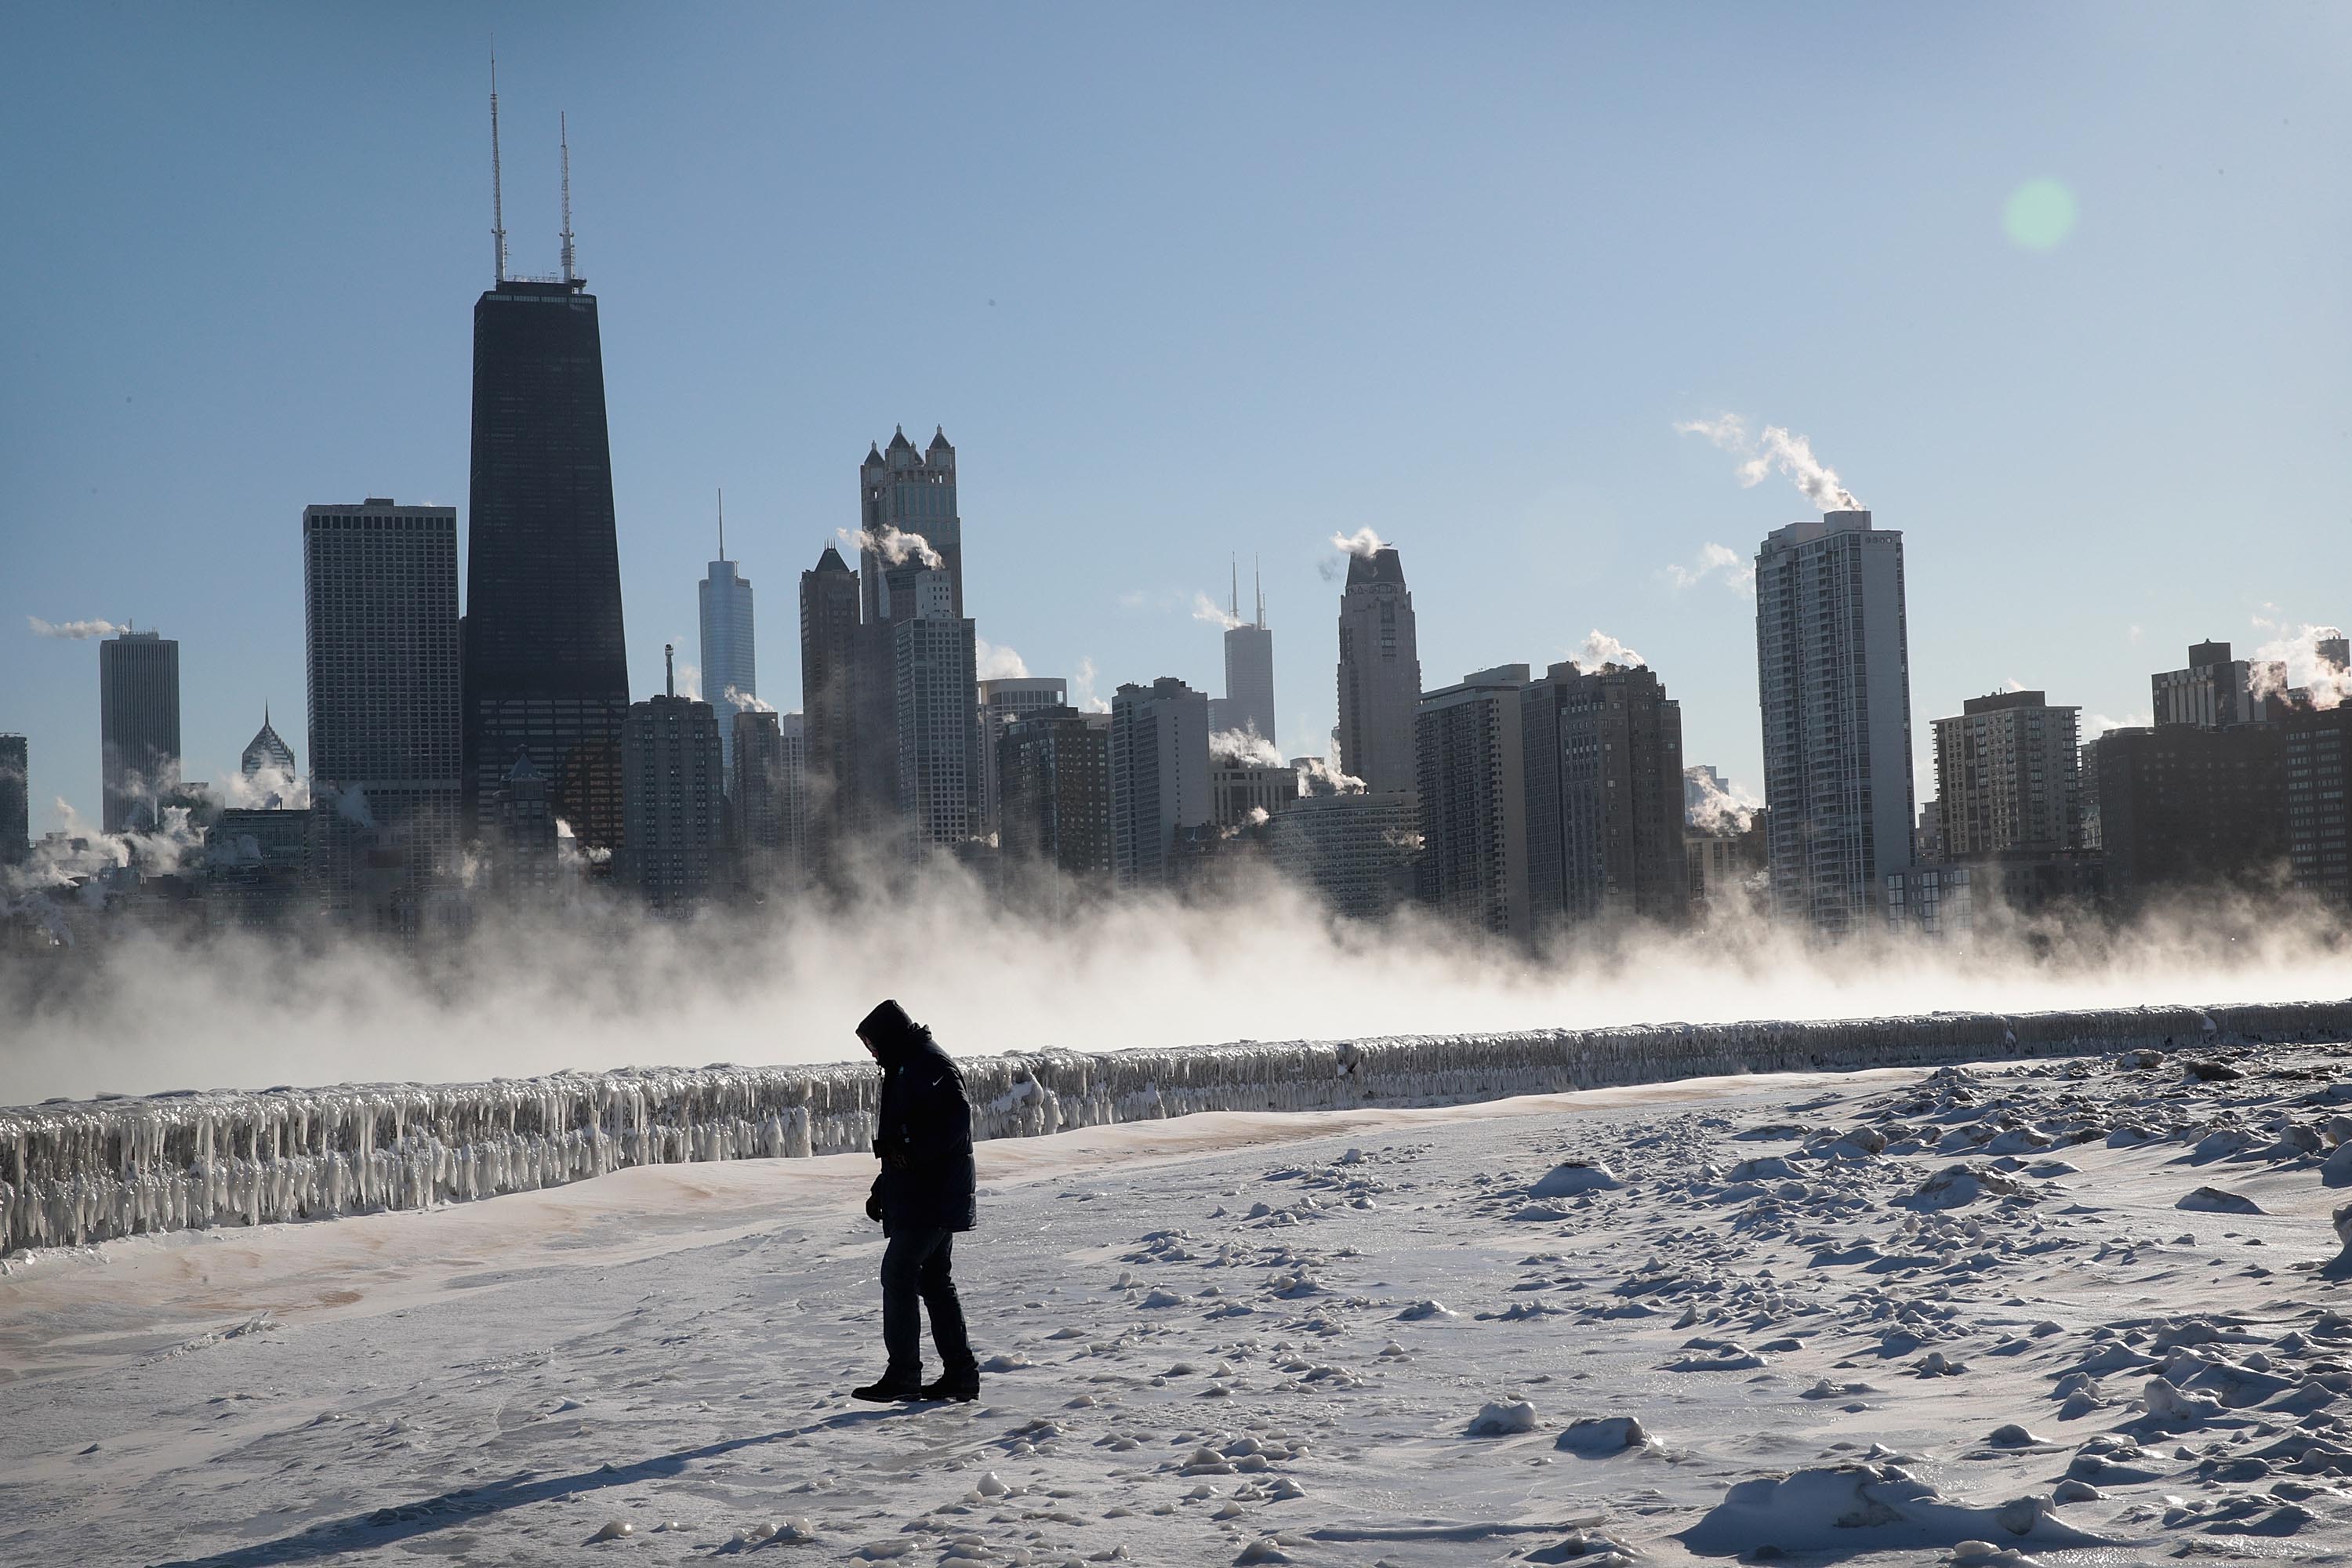 The frozen Chicago lakefront